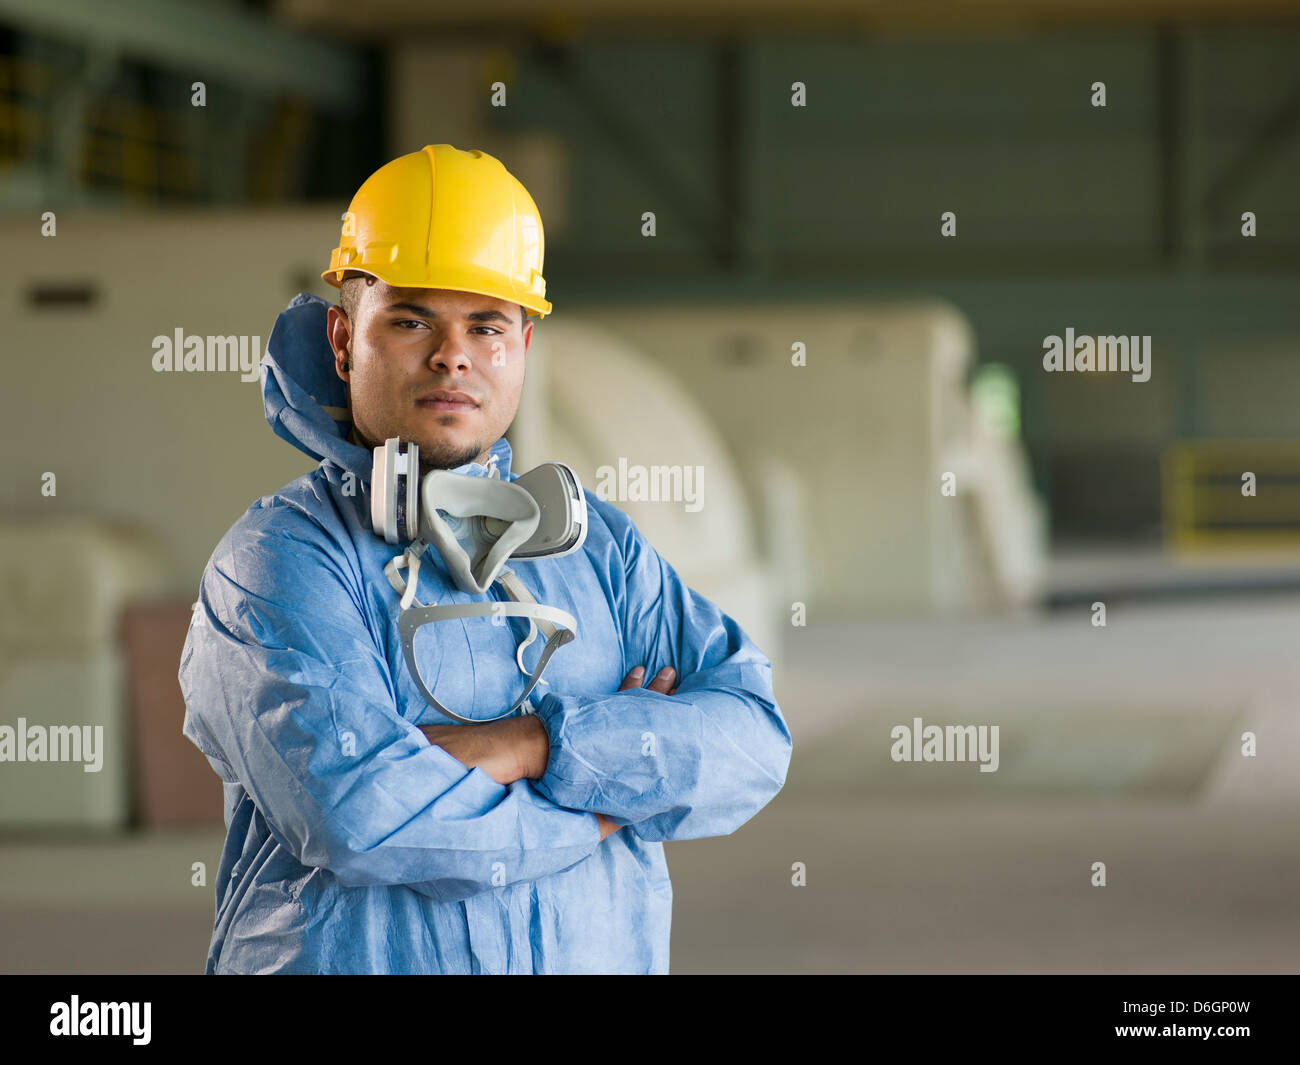 Engineer wearing protective suit on site Stock Photo